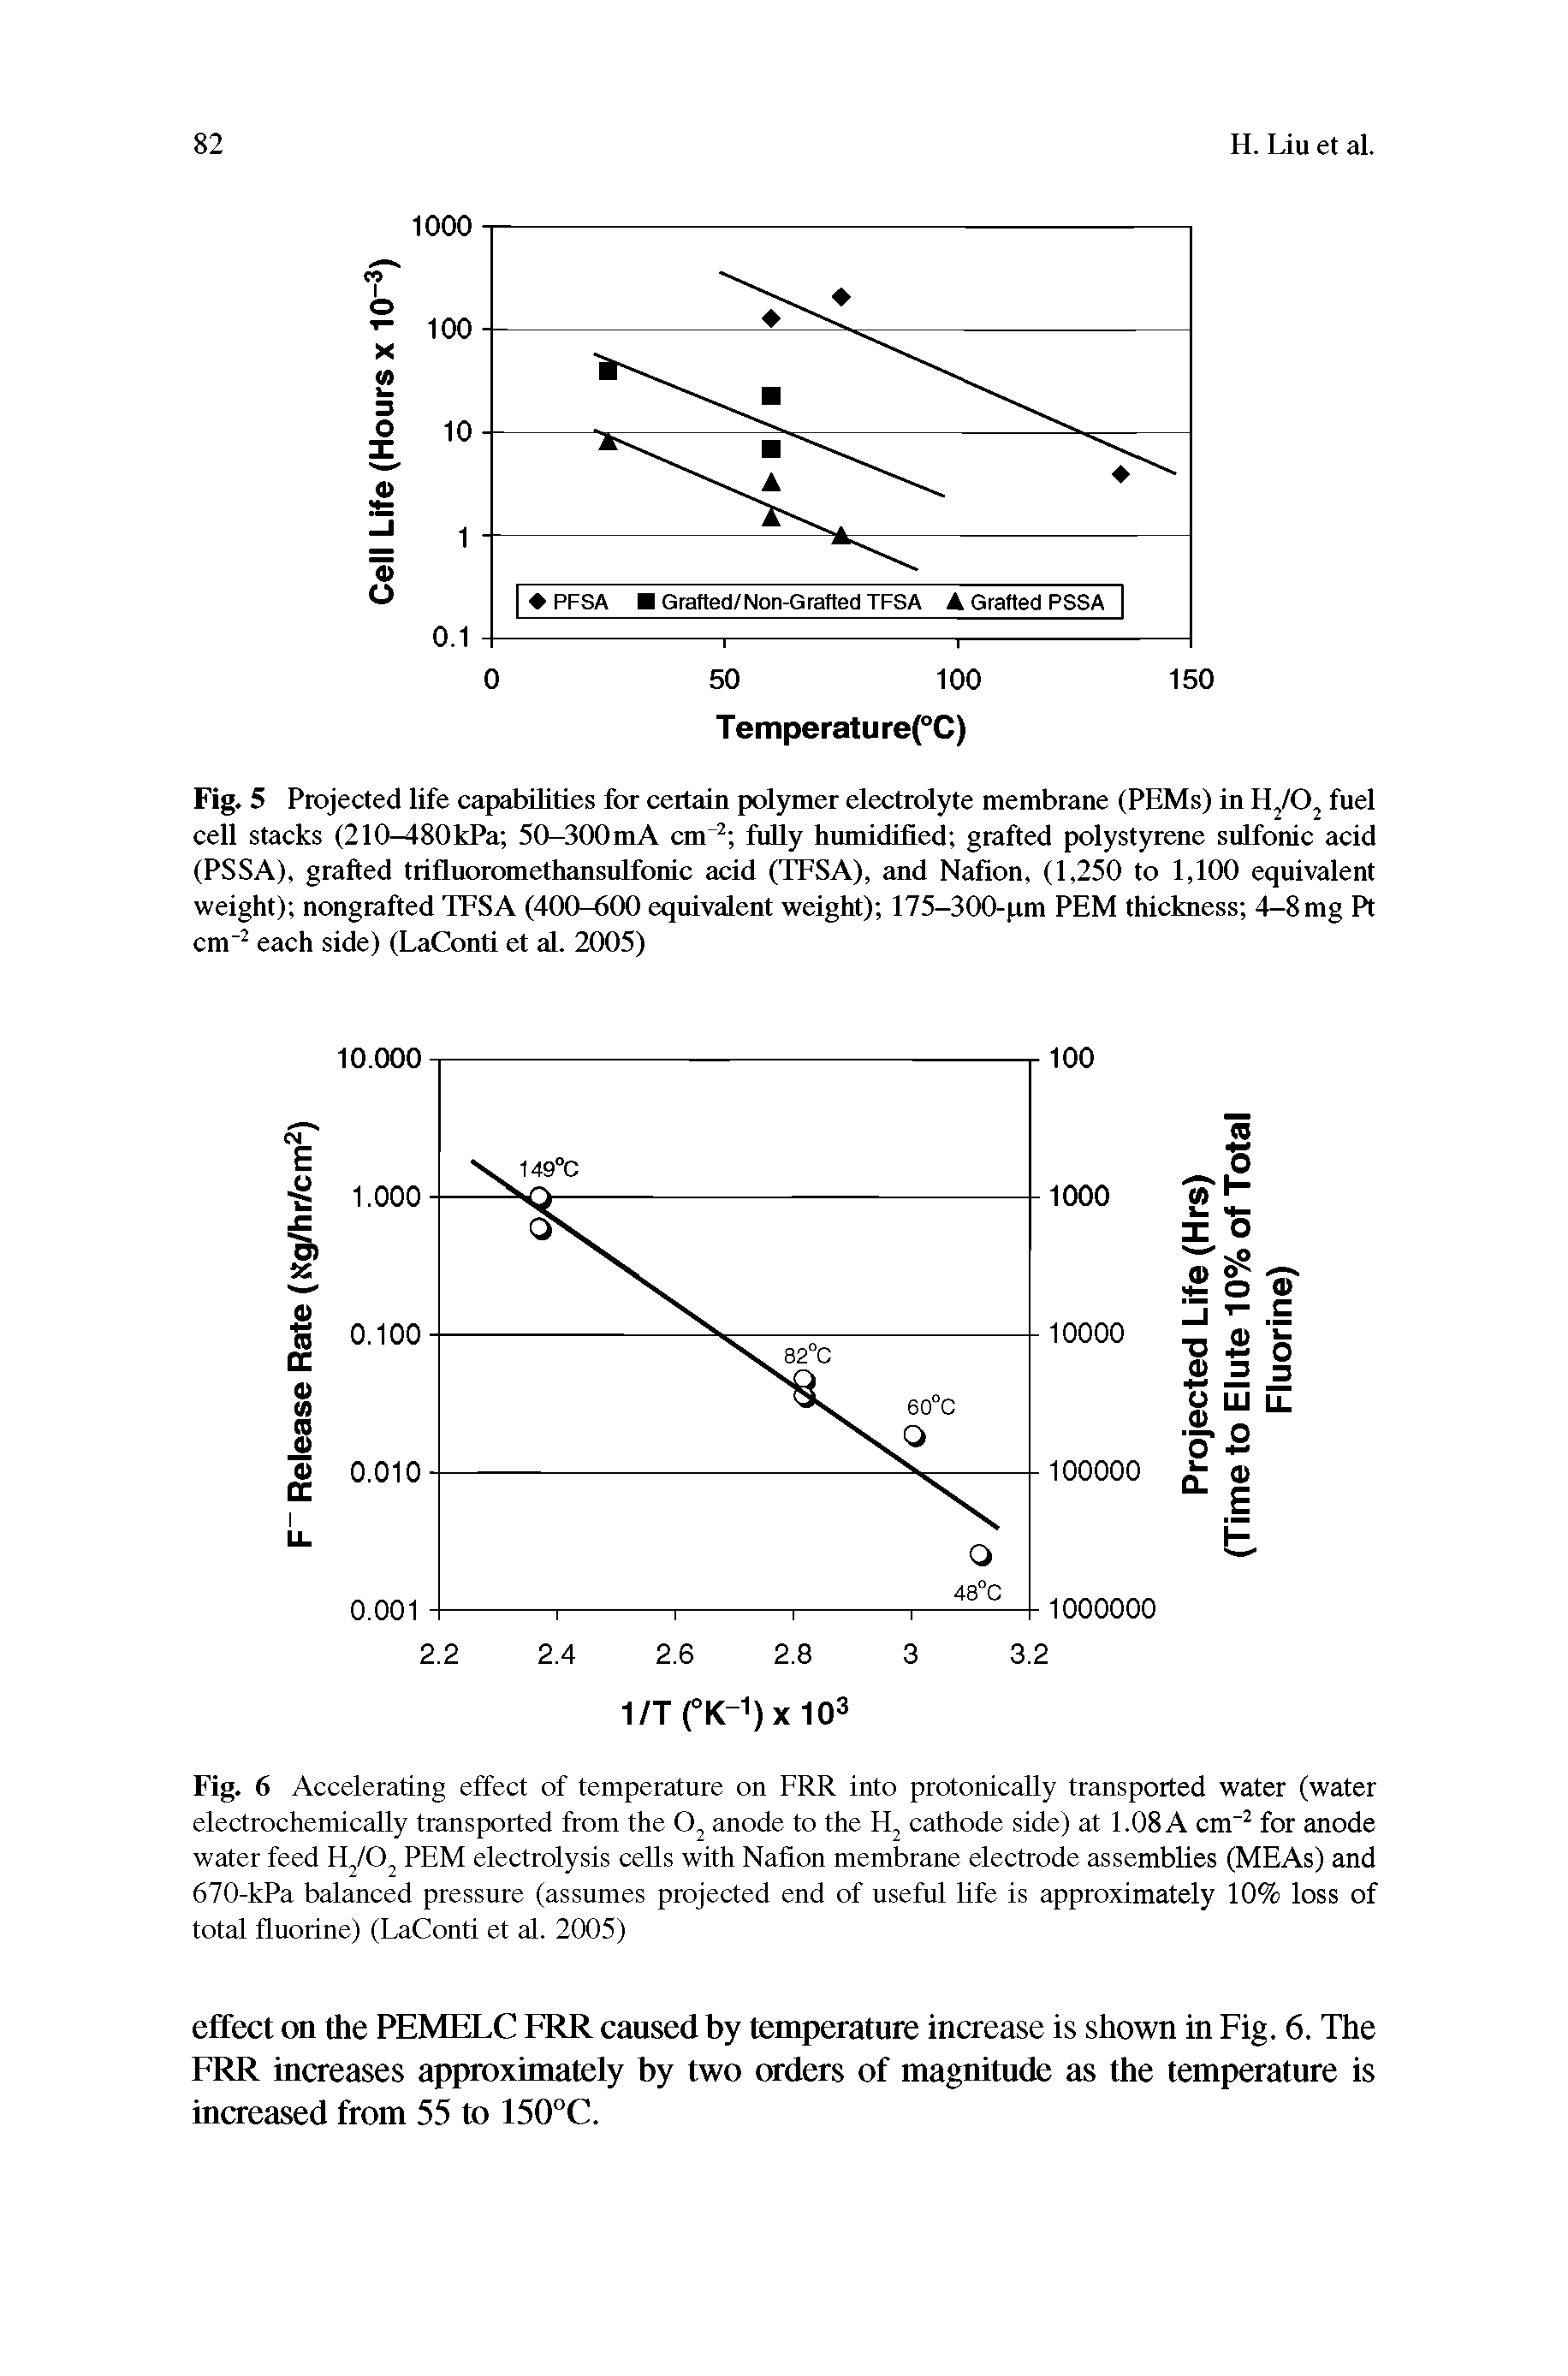 Fig. 6 Accelerating effect of temperature on FRR into protonicaUy transported water (water electrochemicaUy transported from the anode to the cathode side) at 1.08 A cm" for anode water feed PEM electrolysis cells with Nafion membrane electrode assemblies (MEAs) and 670-kPa balanced pressure (assumes projected end of useful life is approximately 10% loss of total fluorine) (LaConti et al. 2005)...